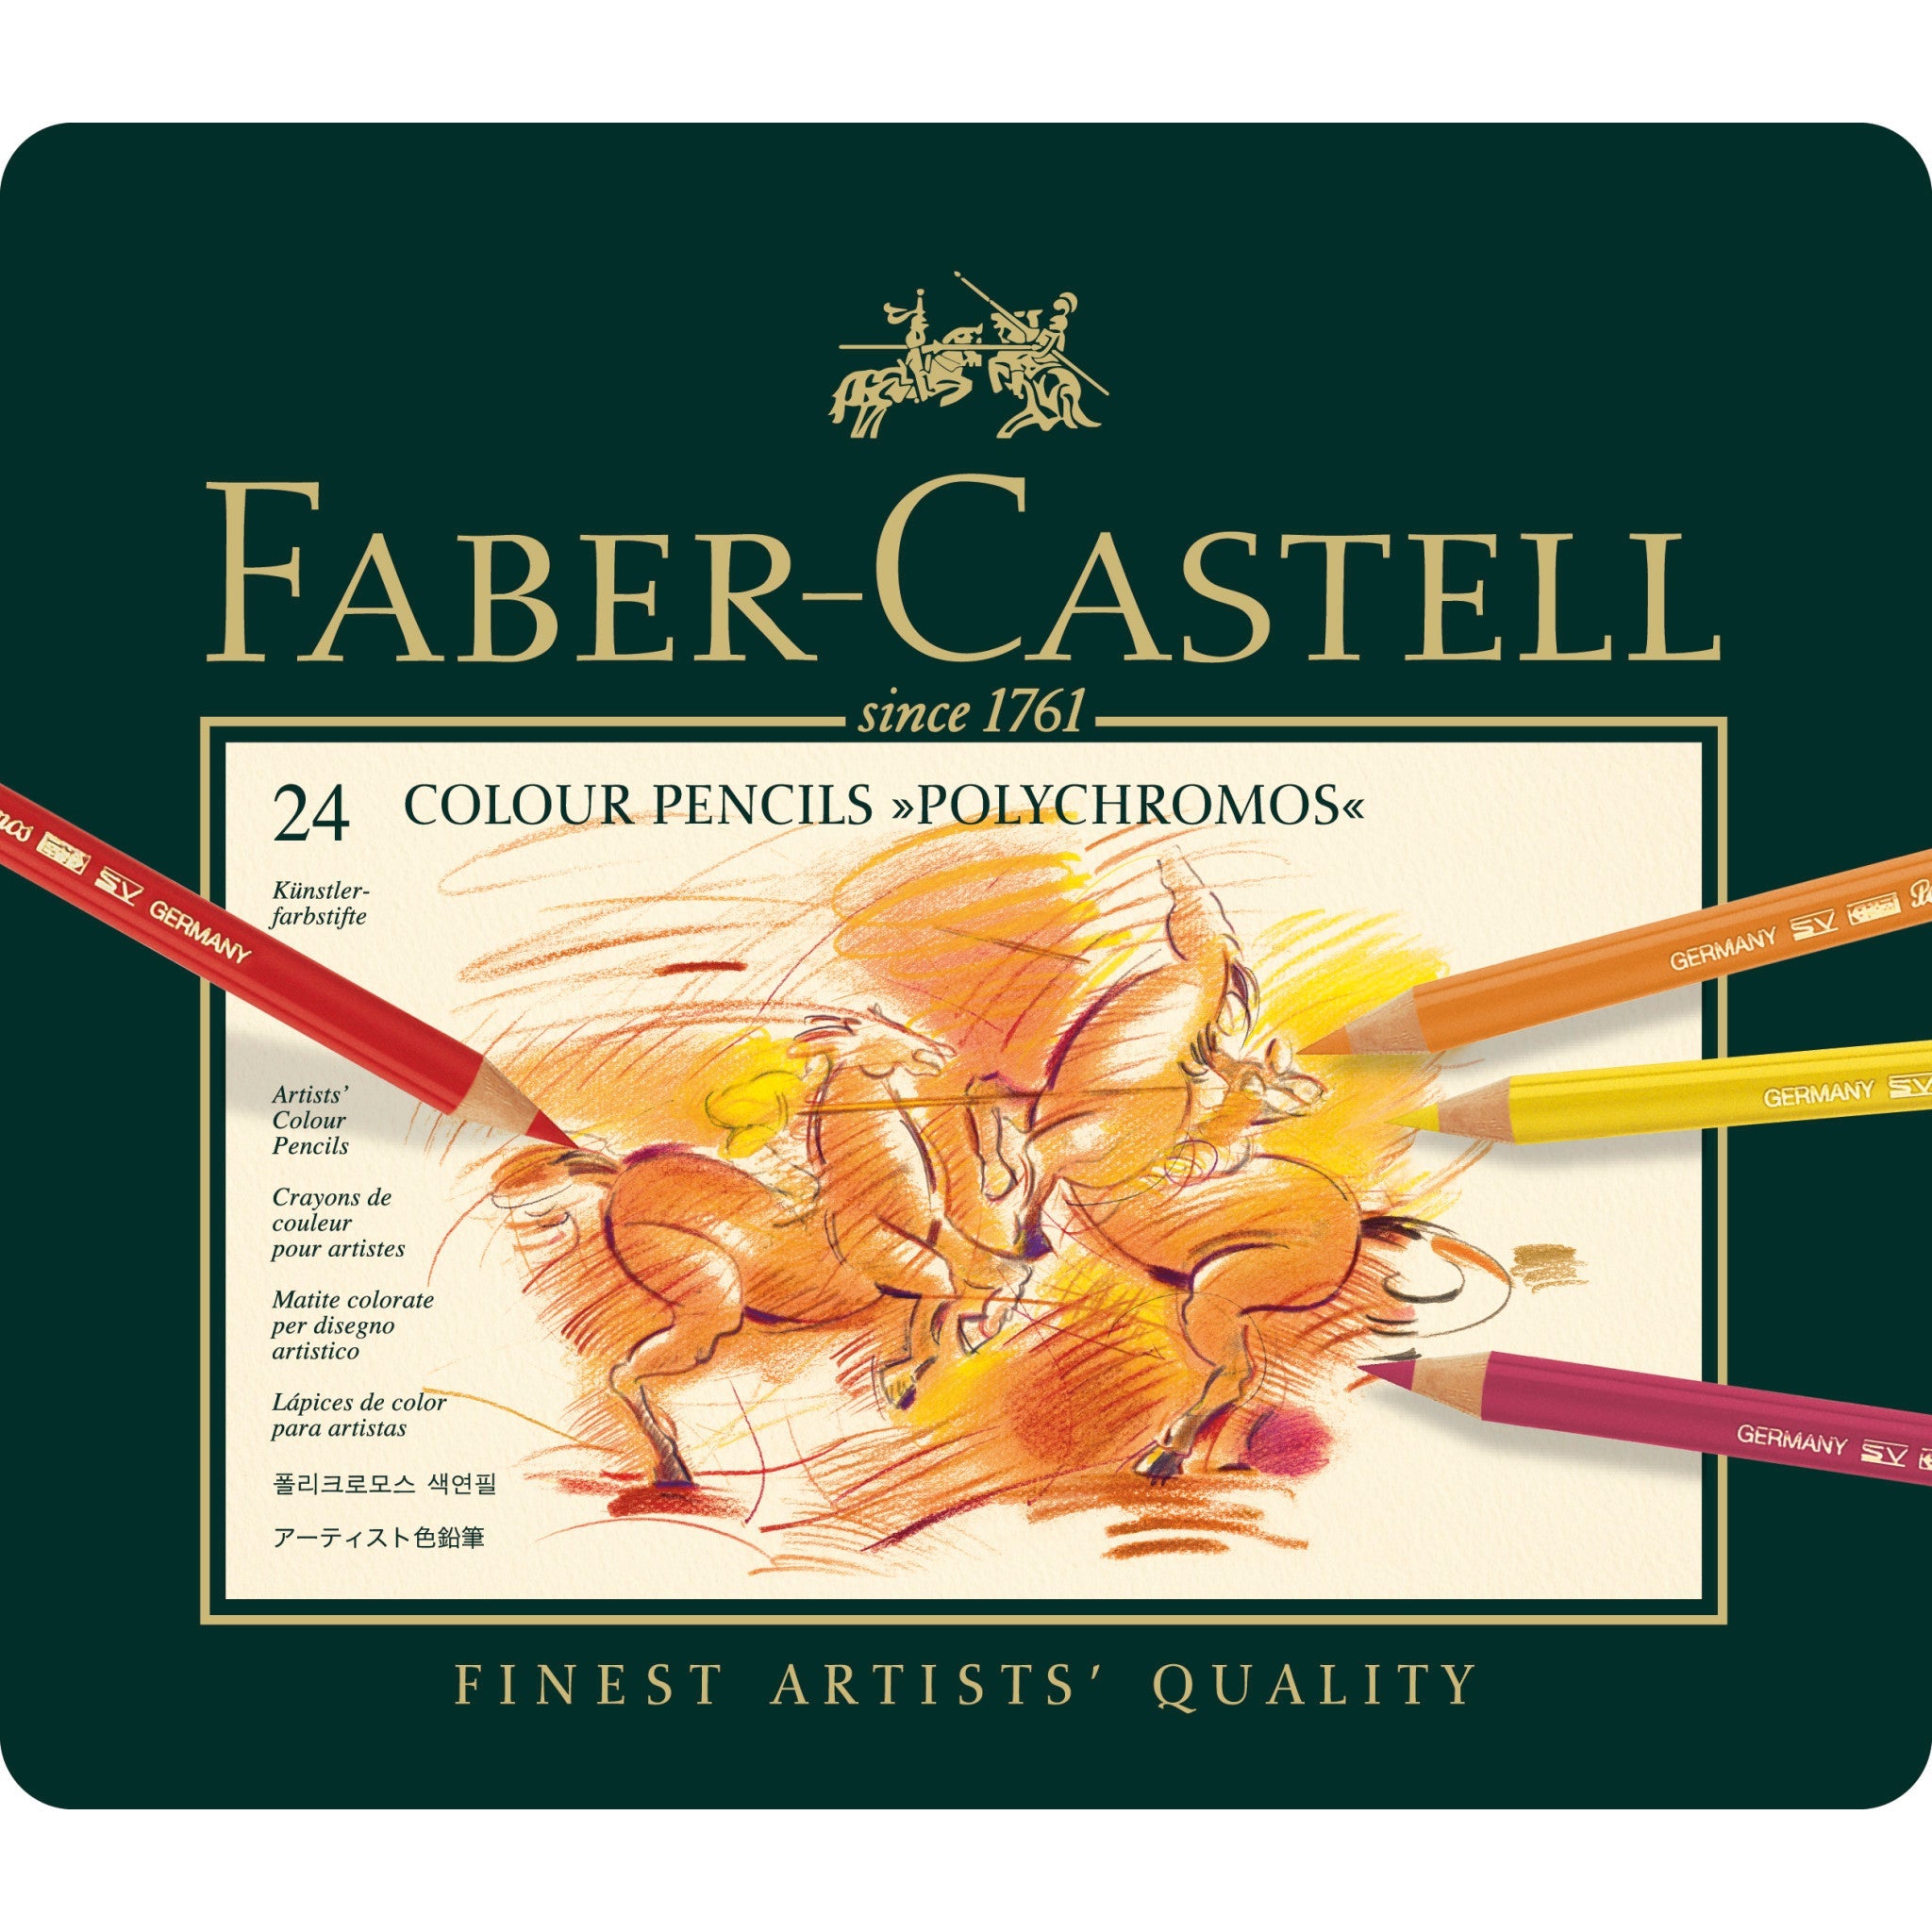 Faber-Castell - Matite colorate 24er Promotionset 